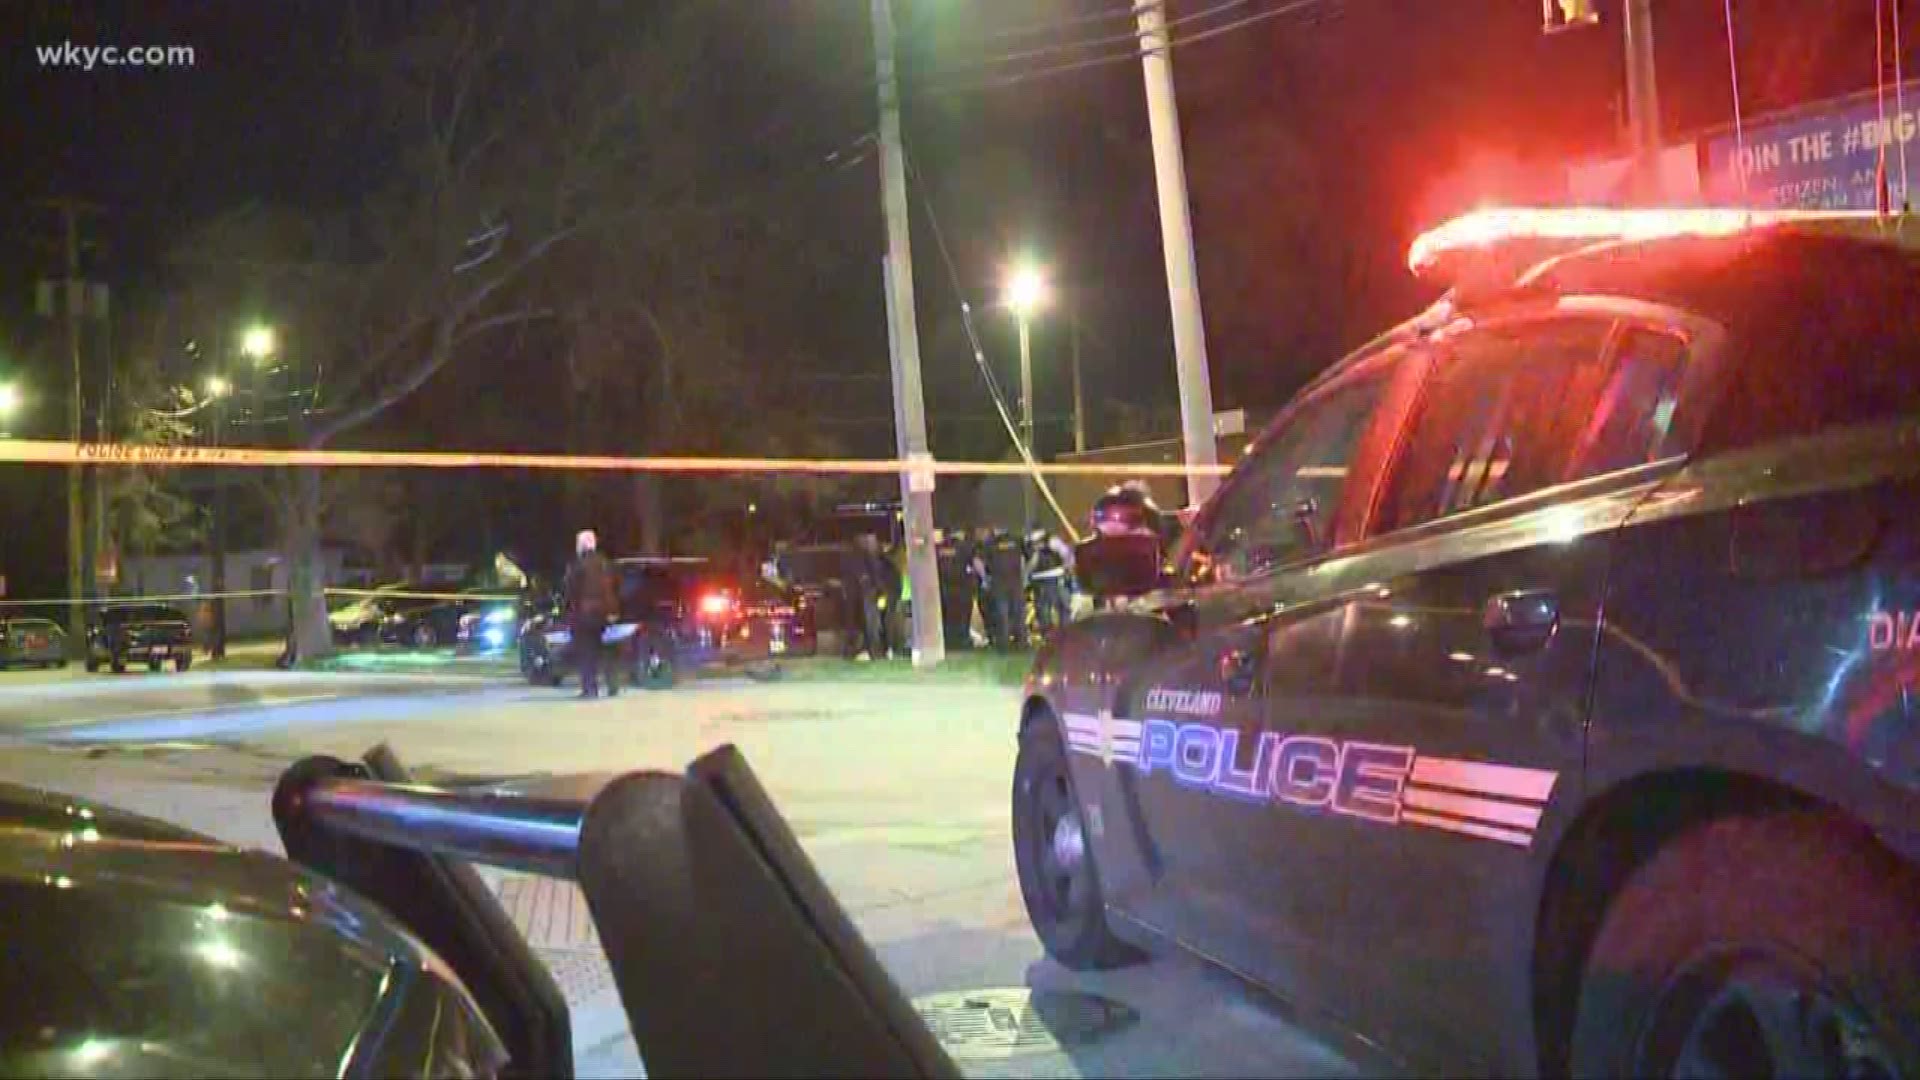 April 22, 2019: Police say two people are dead and two others hurt after gunfire erupted overnight outside Club Alma Yaucana on West 25th Street in Cleveland.